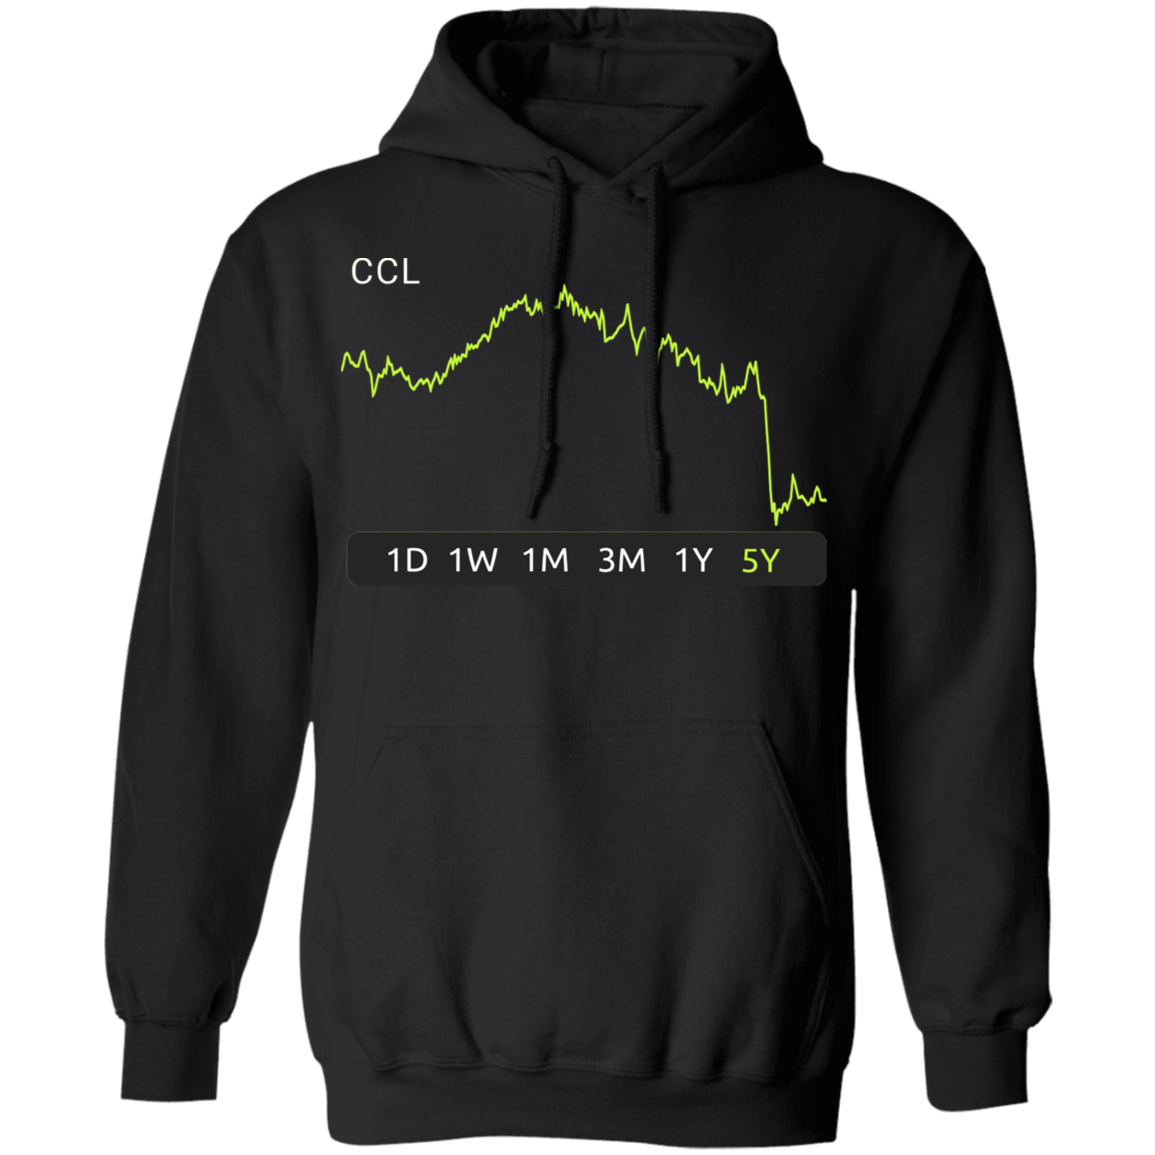 CCL Stock 5y Pullover Hoodie